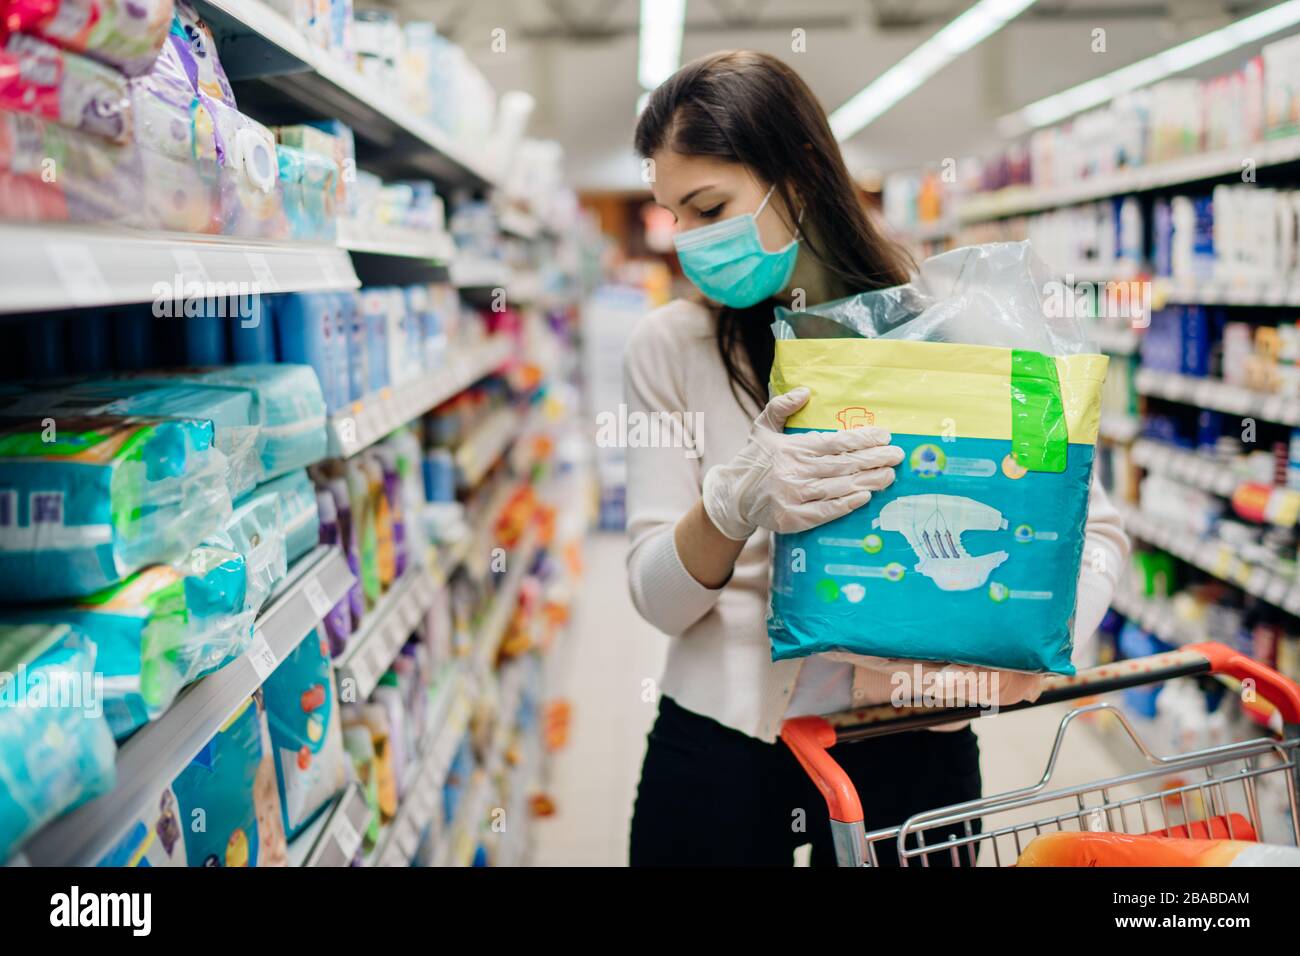 Woman shopper with mask and gloves panic buying disposable diapers.Preparing for pathogen virus pandemic quarantine.Prepper buying bulk baby products Stock Photo